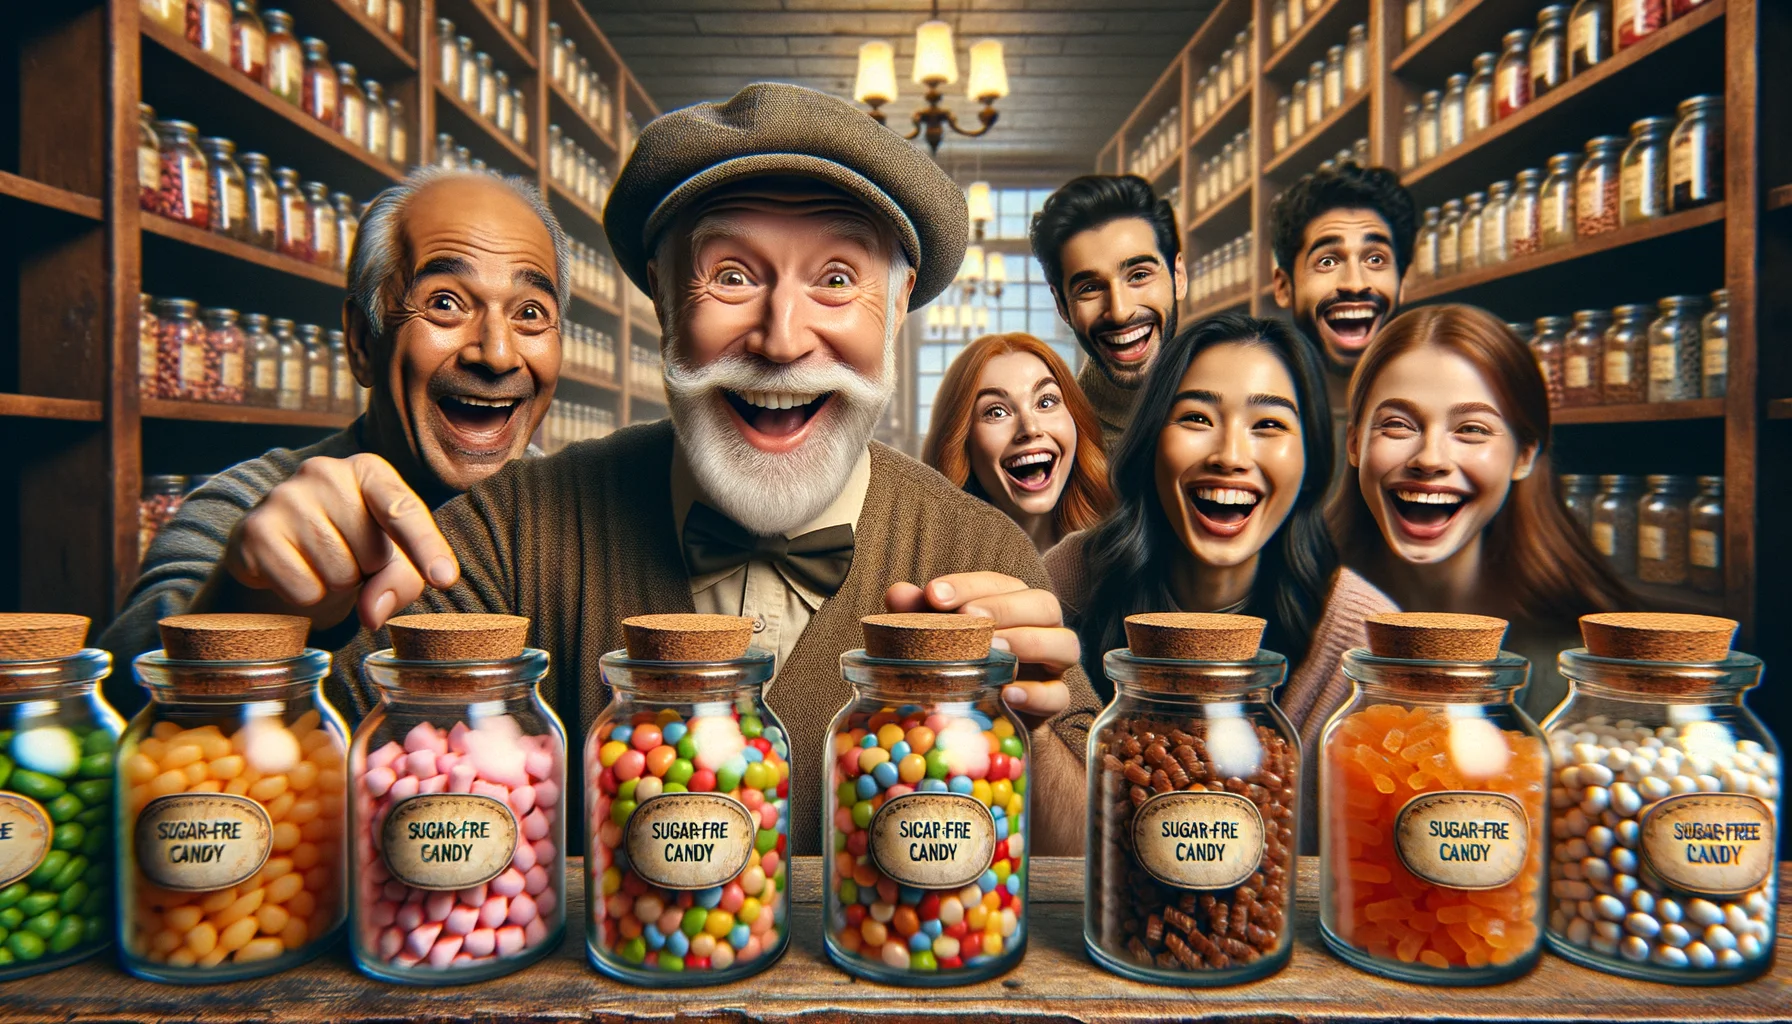 Craft a hilariously entertaining image, brimming with persuasive realism! Visualize a scene set in a quaint, rustic candy shop. Picture shelves lined with rows of jars filled with brightly colored candies. Focus on one jar in particular, cork-topped and stout, with a classic round label with playful cursive lettering reading 'Sugar-Free Candy'. Imagine an array of peculiarly charming customers, a middle-aged Hispanic man smiling mischievously, a young South Asian woman laughing heartily, and an excitable Caucasian boy pointing towards the sugar-free candies with wide eyes, all sharing joyful surprise, as though the discovery of sugar-free candy in this traditional little shop is the most perfect, absurdly delightful scenario.